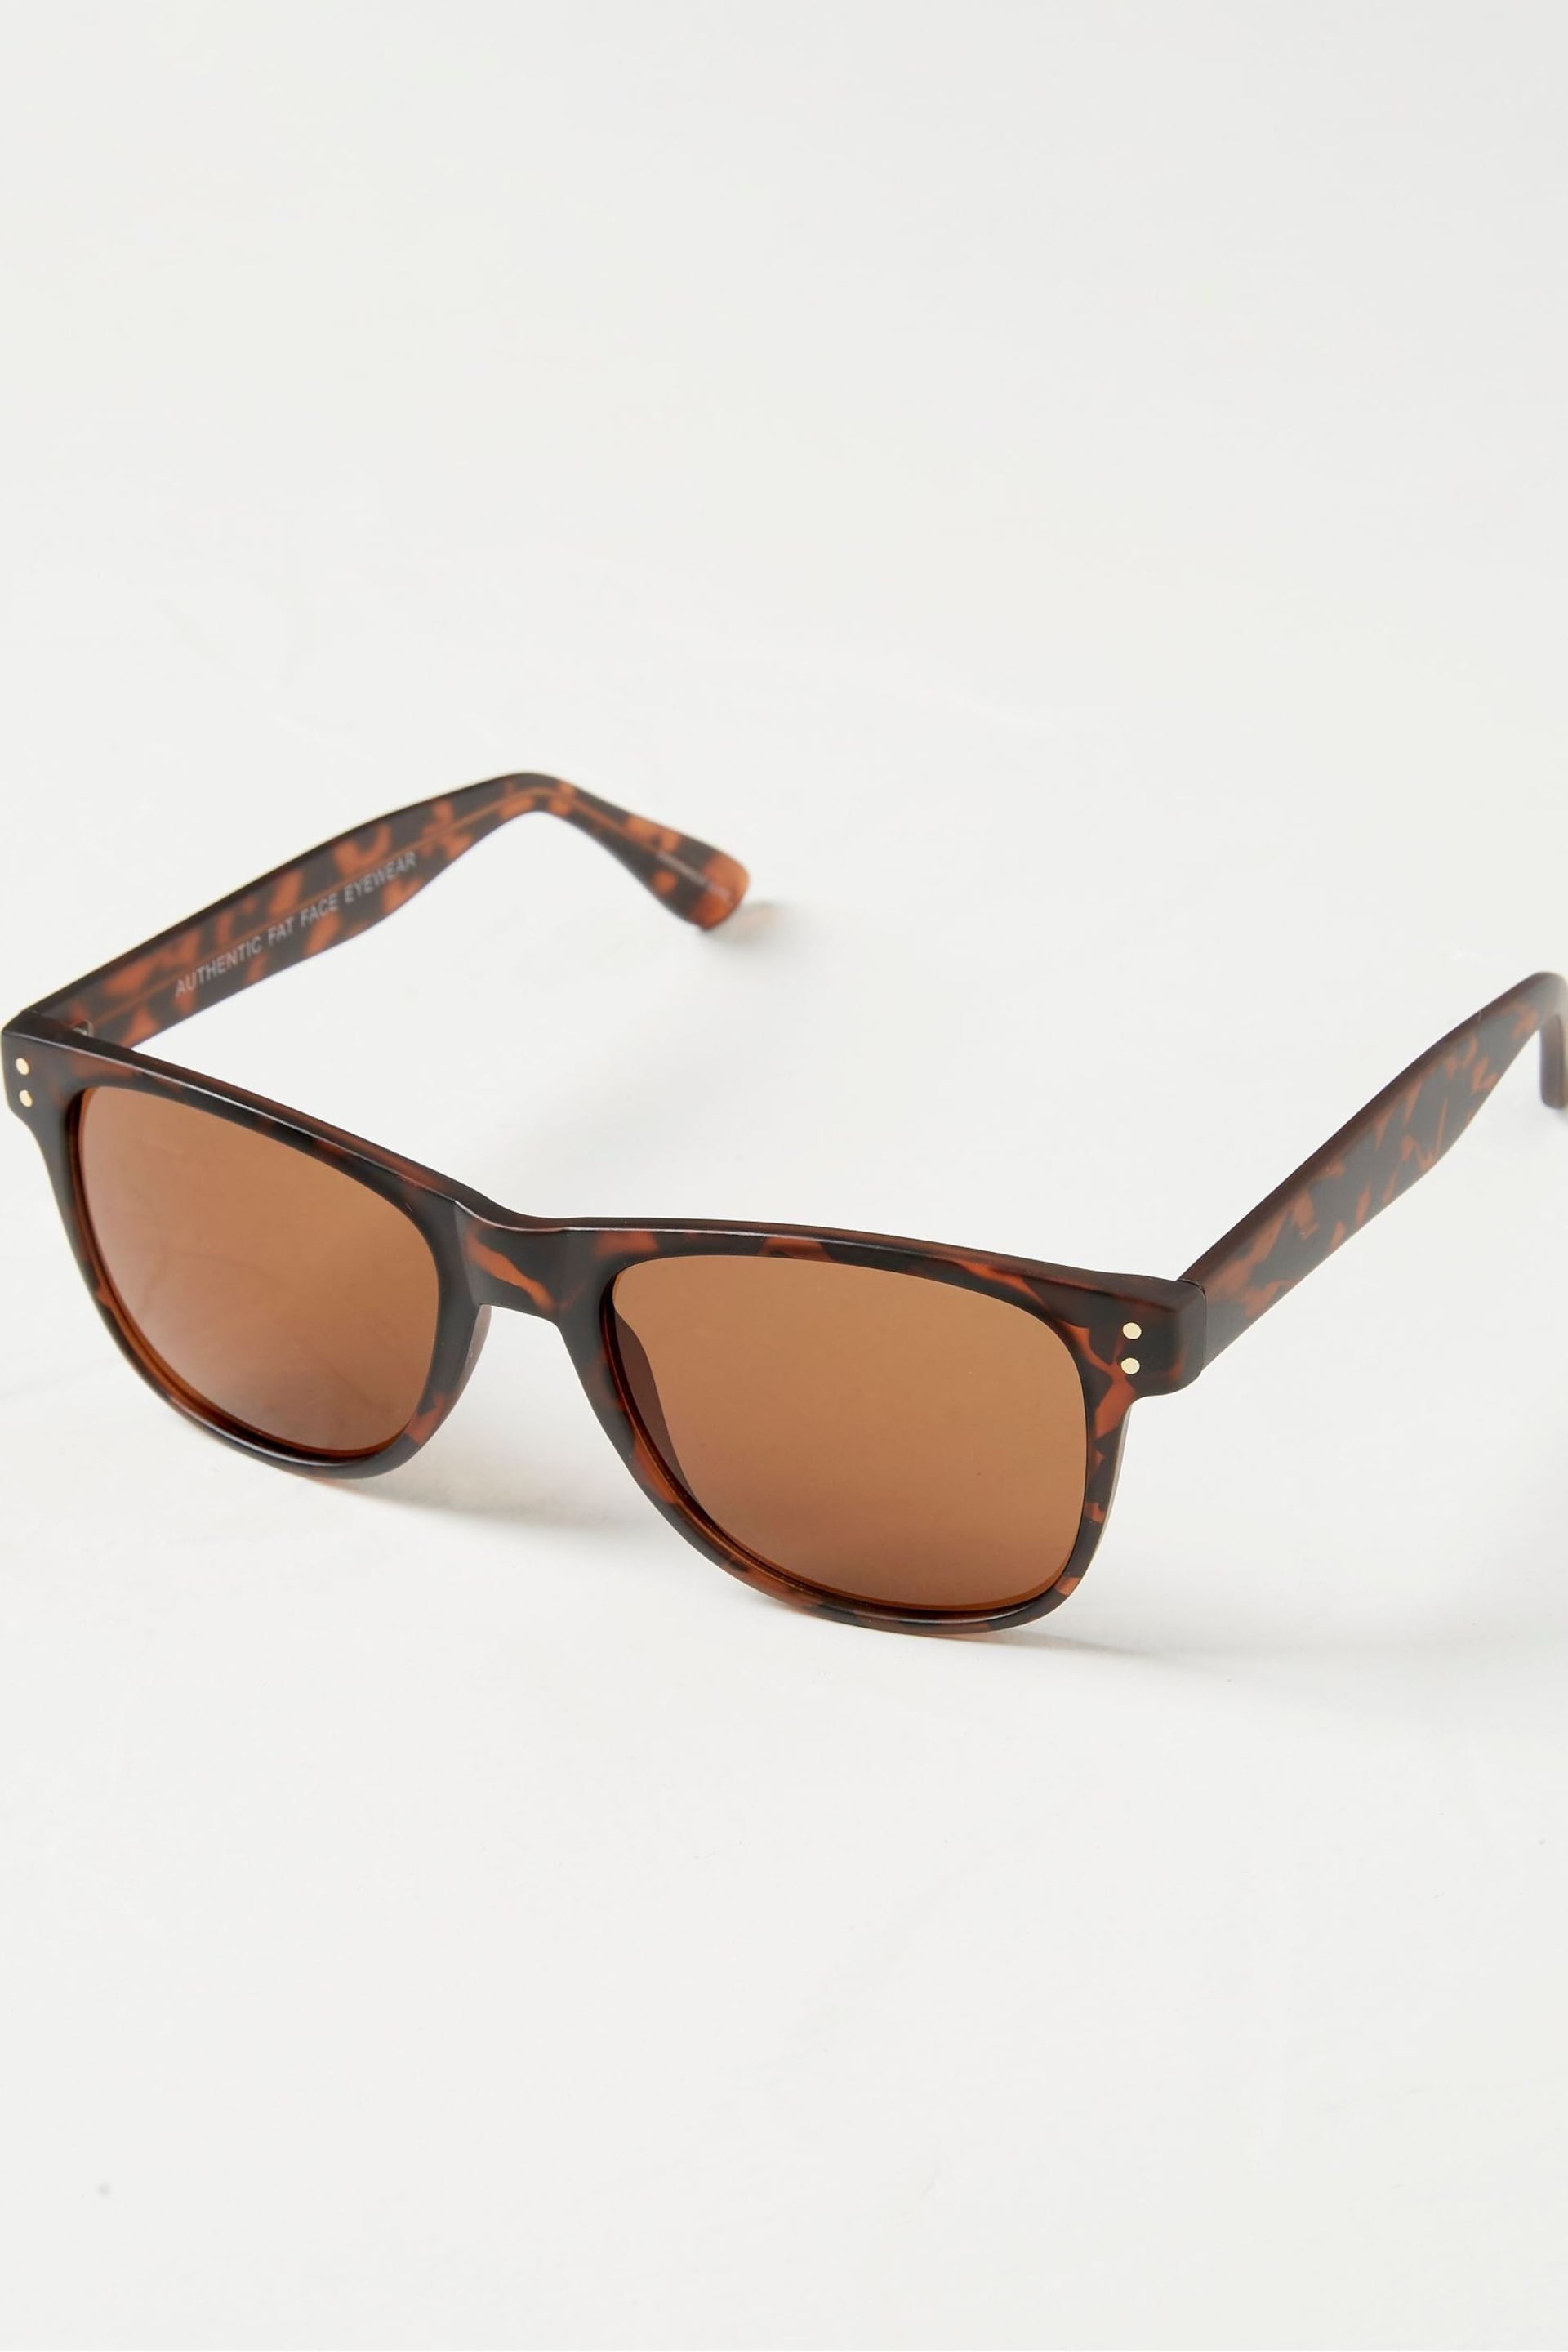 FatFace Brown Theo Sunglasses - Image 1 of 2